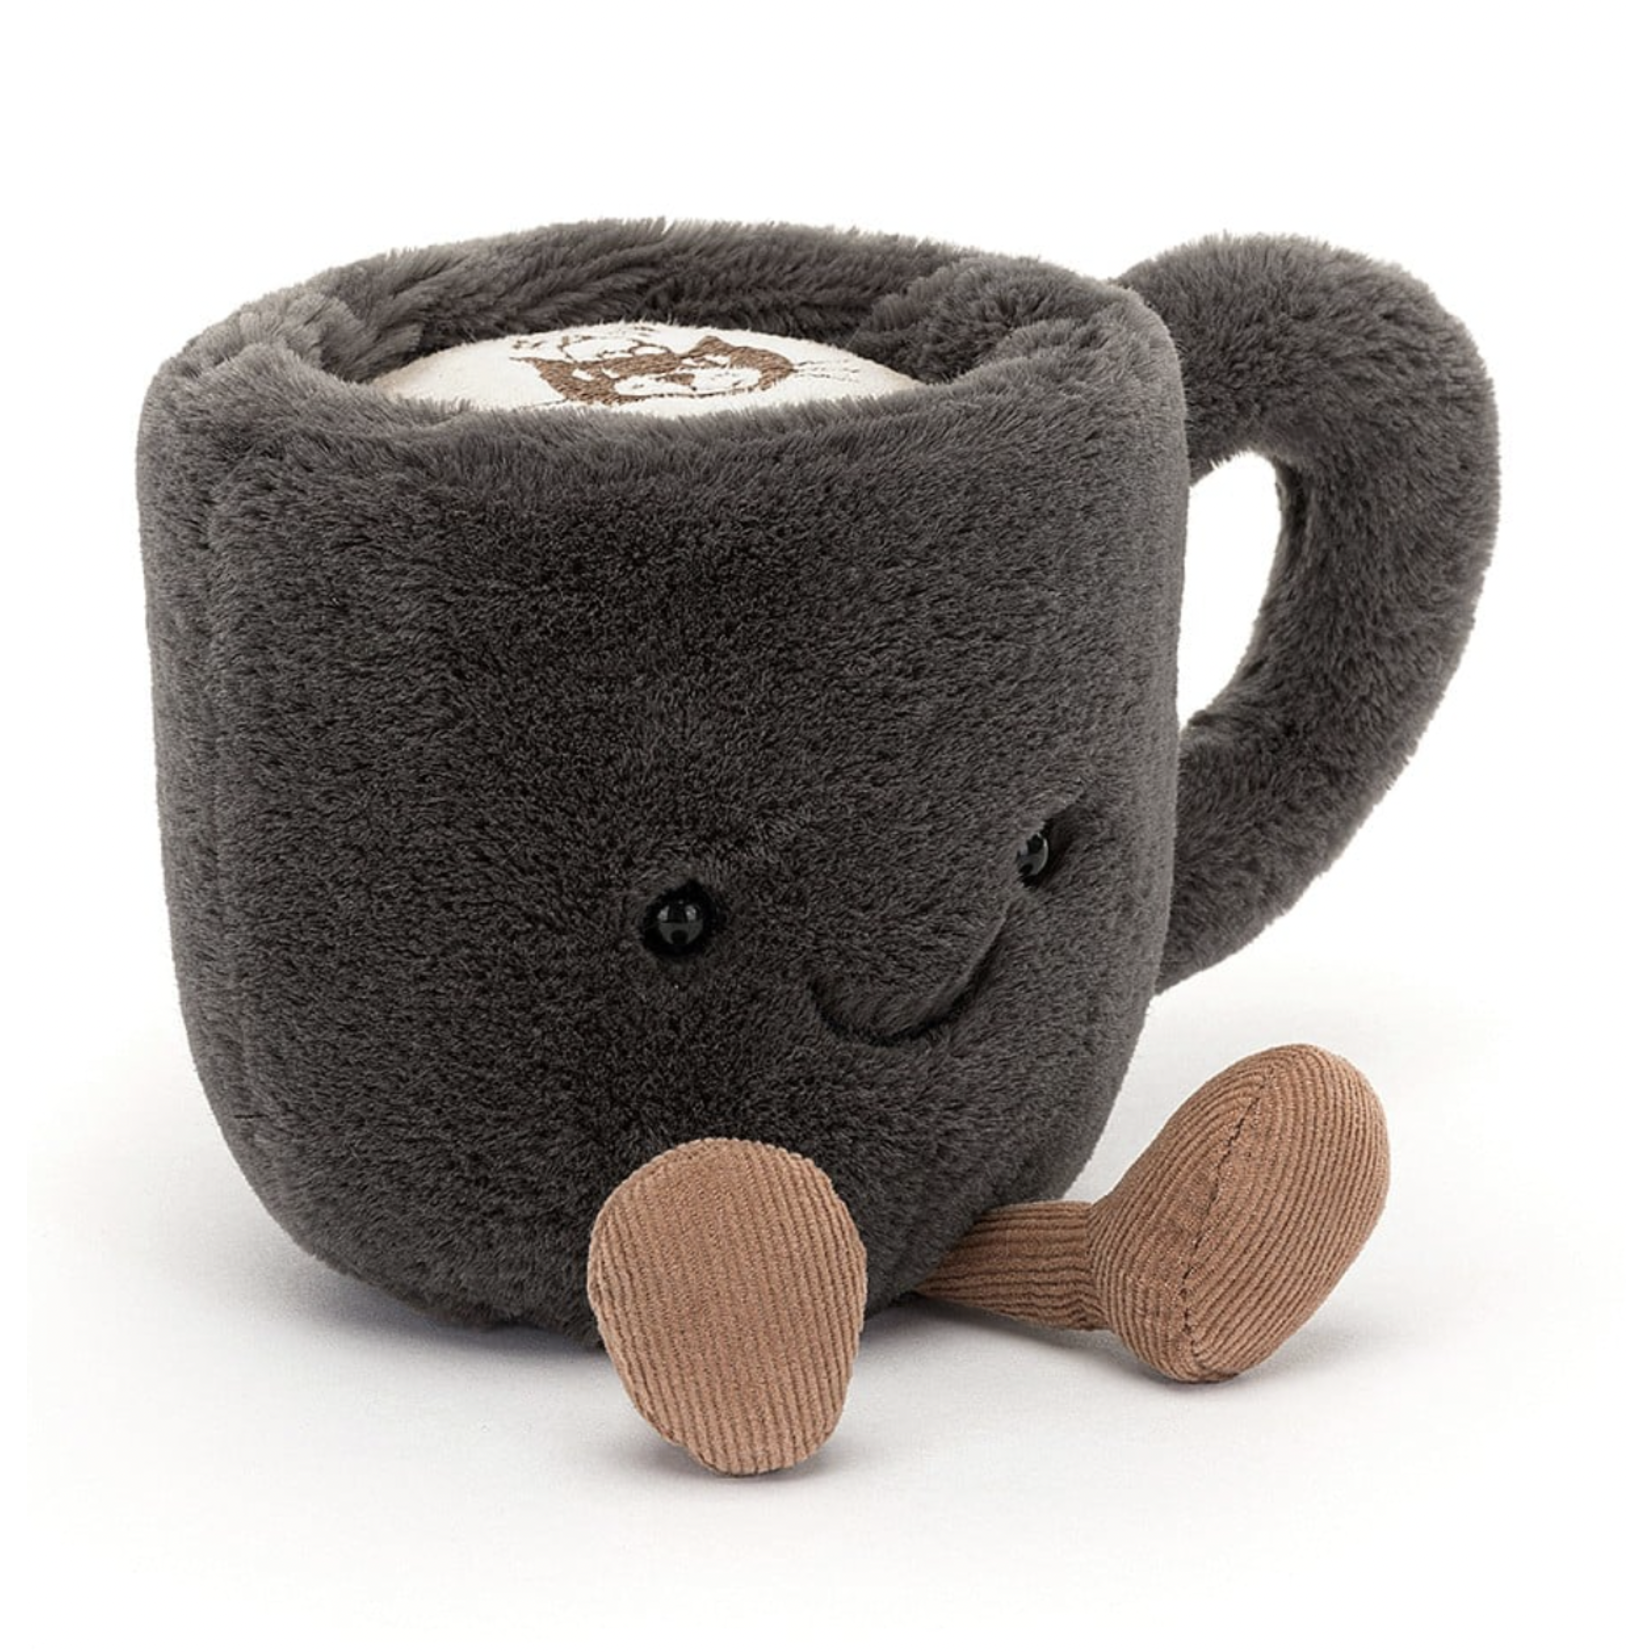 Jellycat Amuseable Coffee Cup